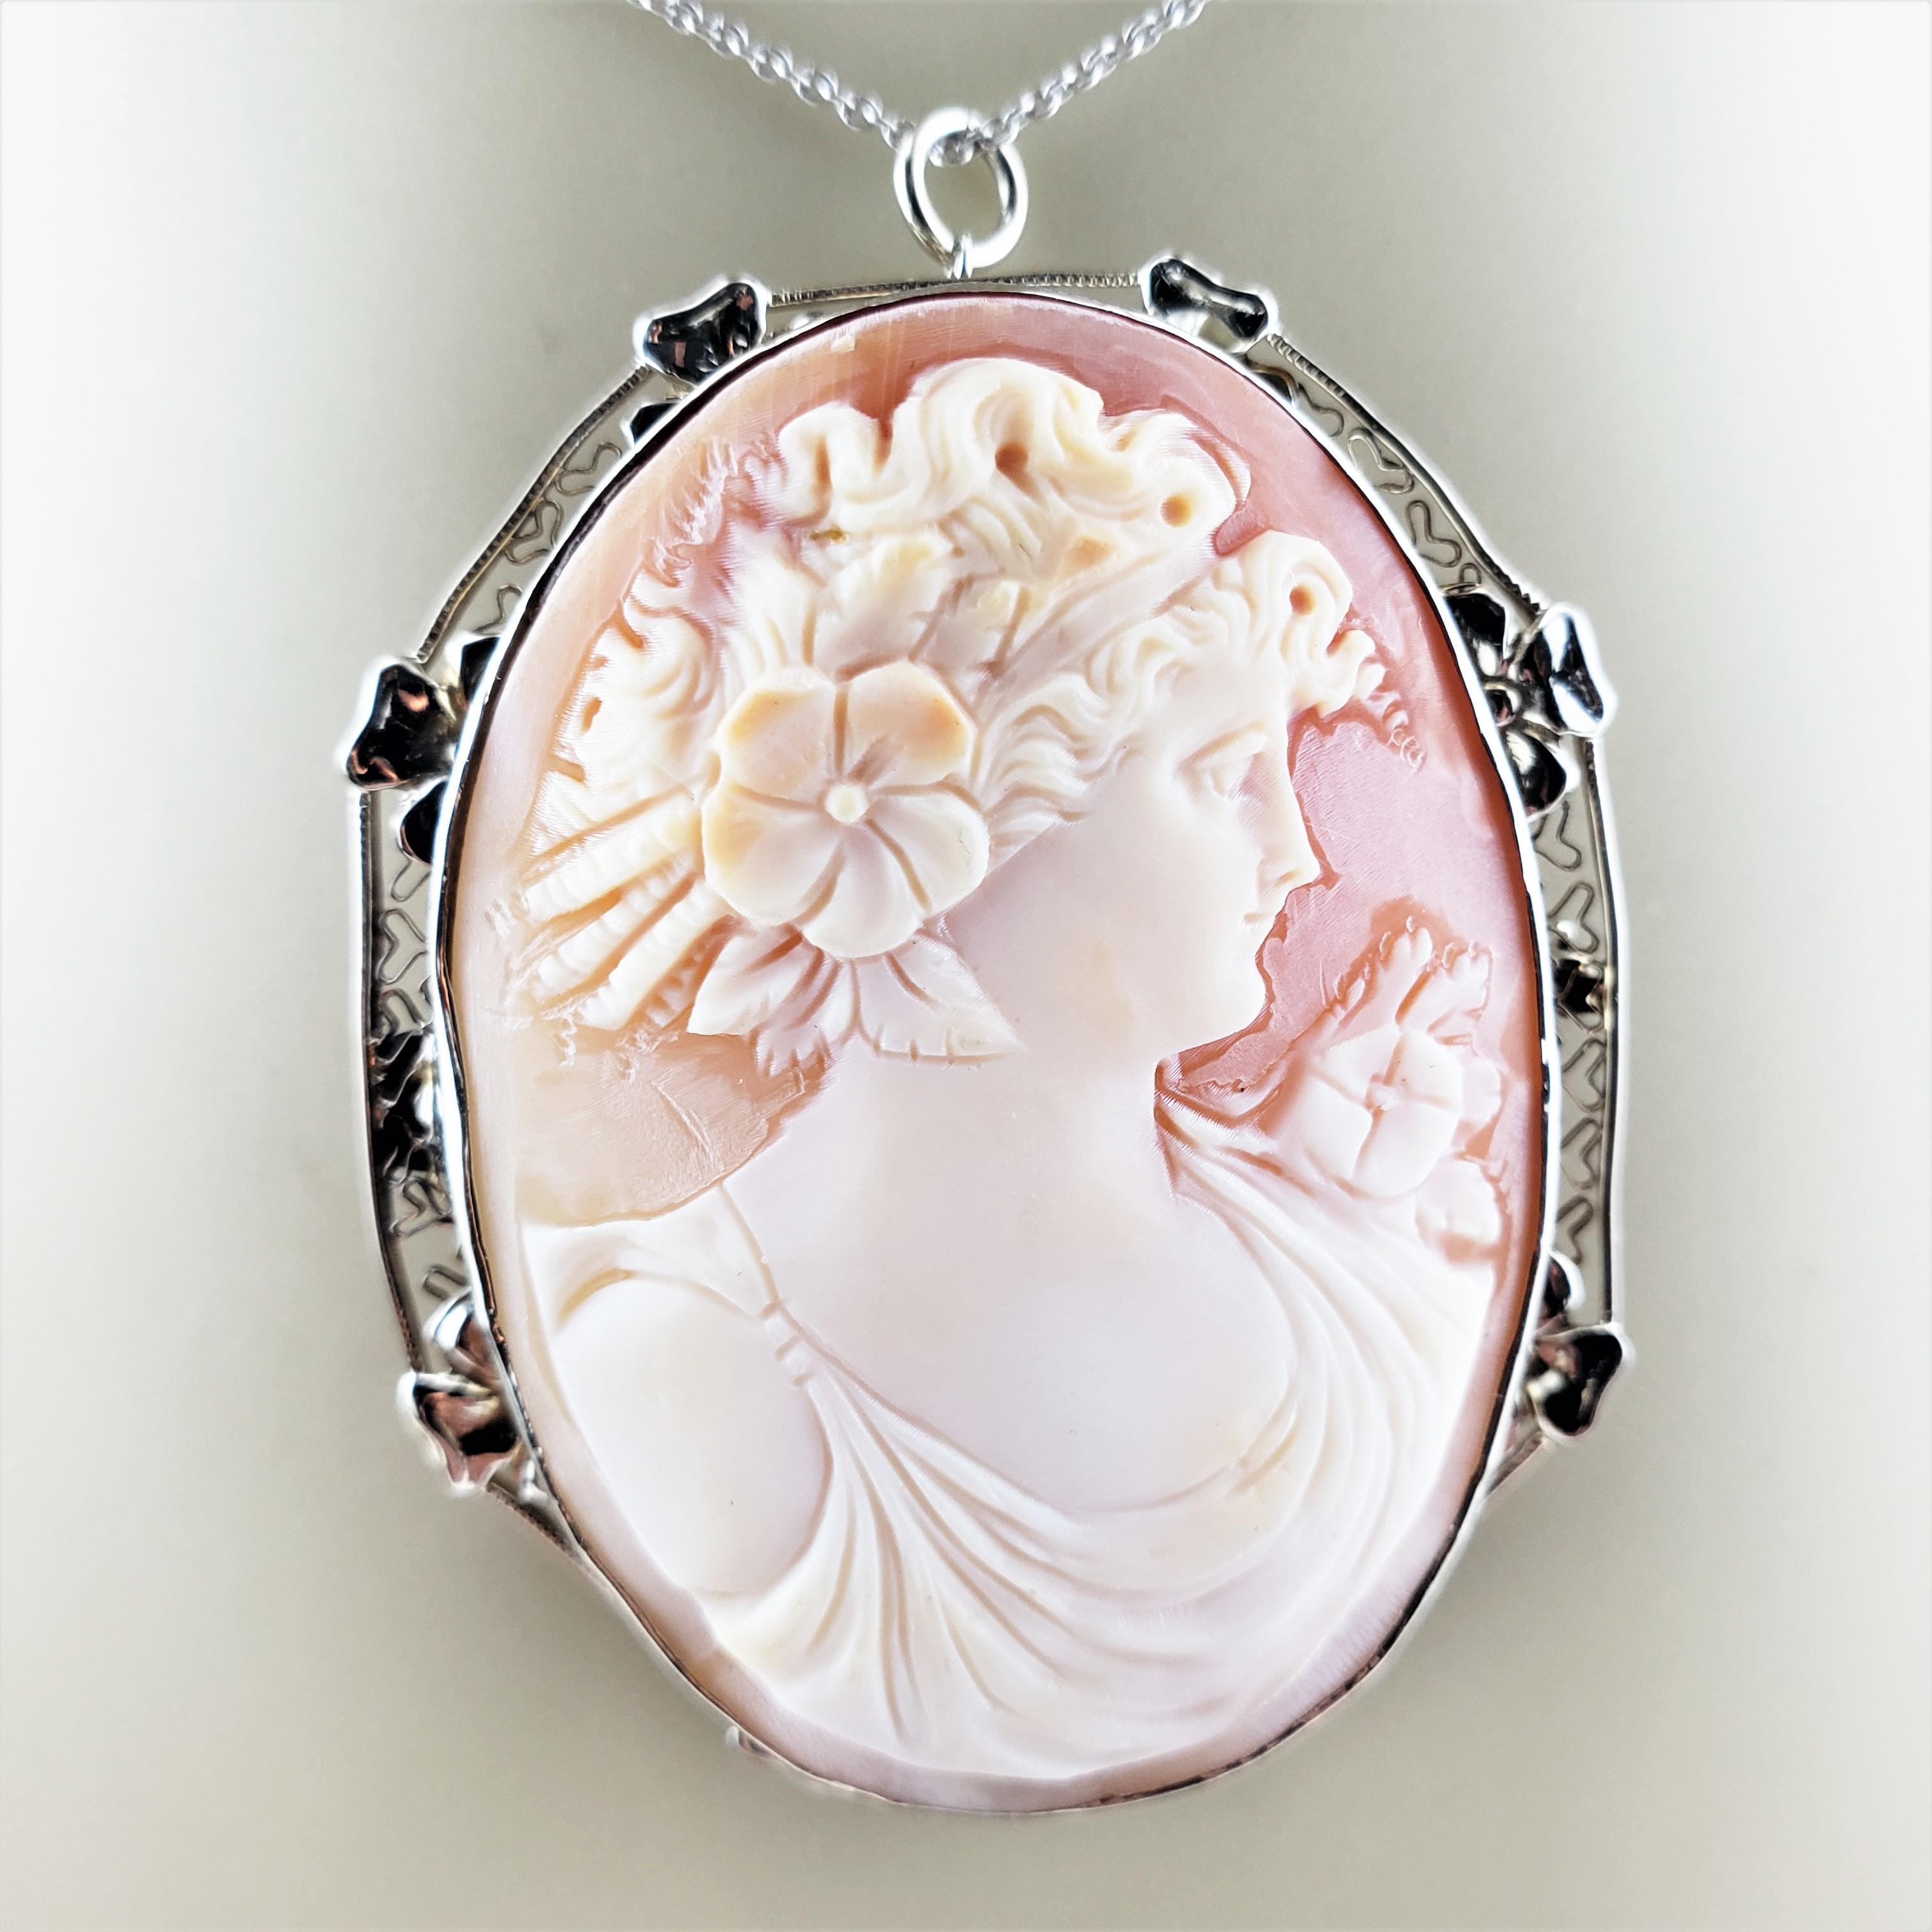 14 Karat Yellow and White Gold Cameo Brooch/Pendant For Sale 5